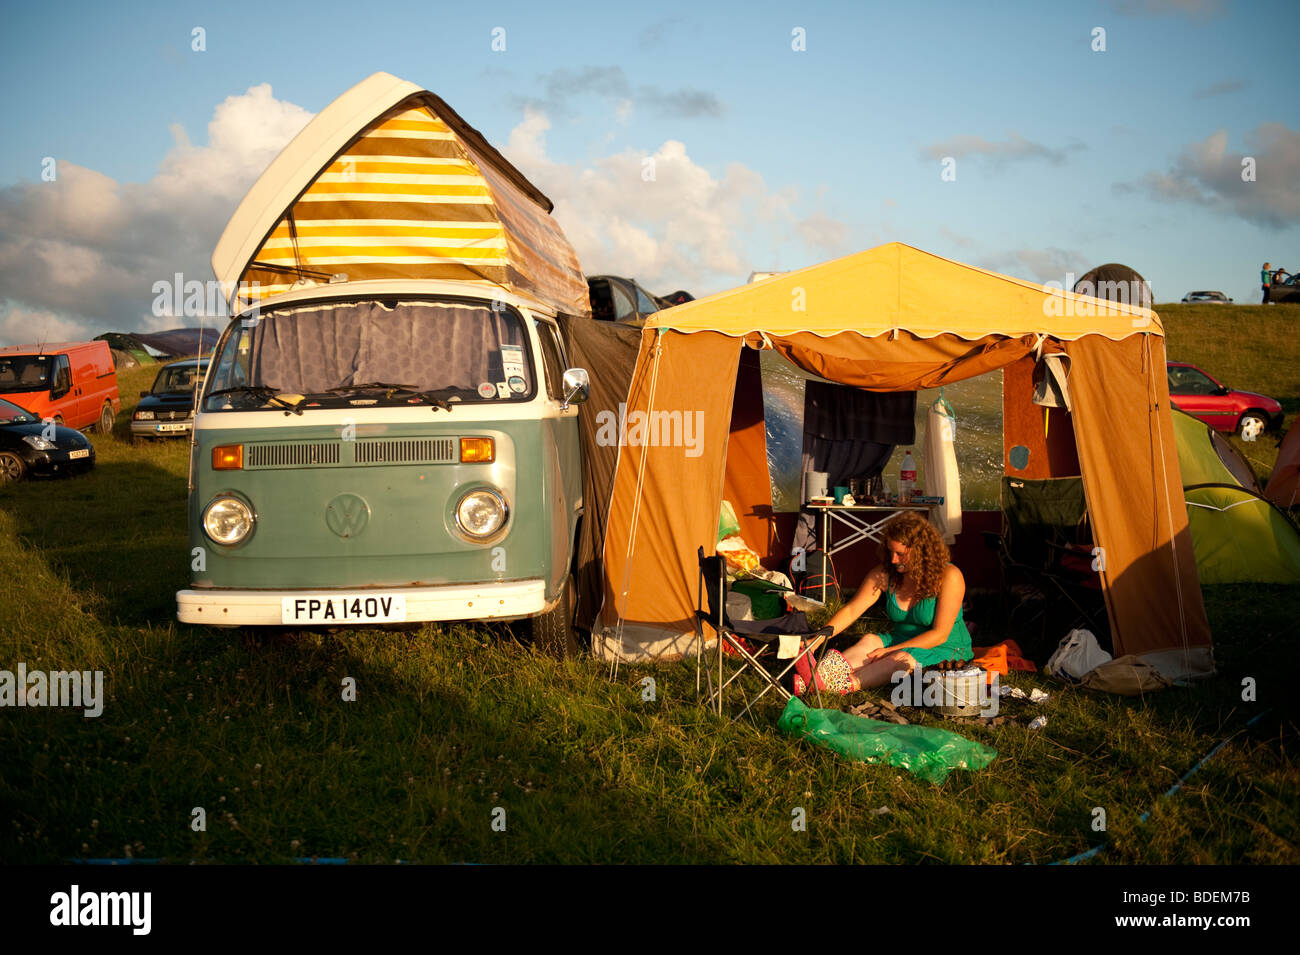 A young woman camping with her tent an VW campervan at The Square Festival, Borth, July 2009. Wales UK Stock Photo